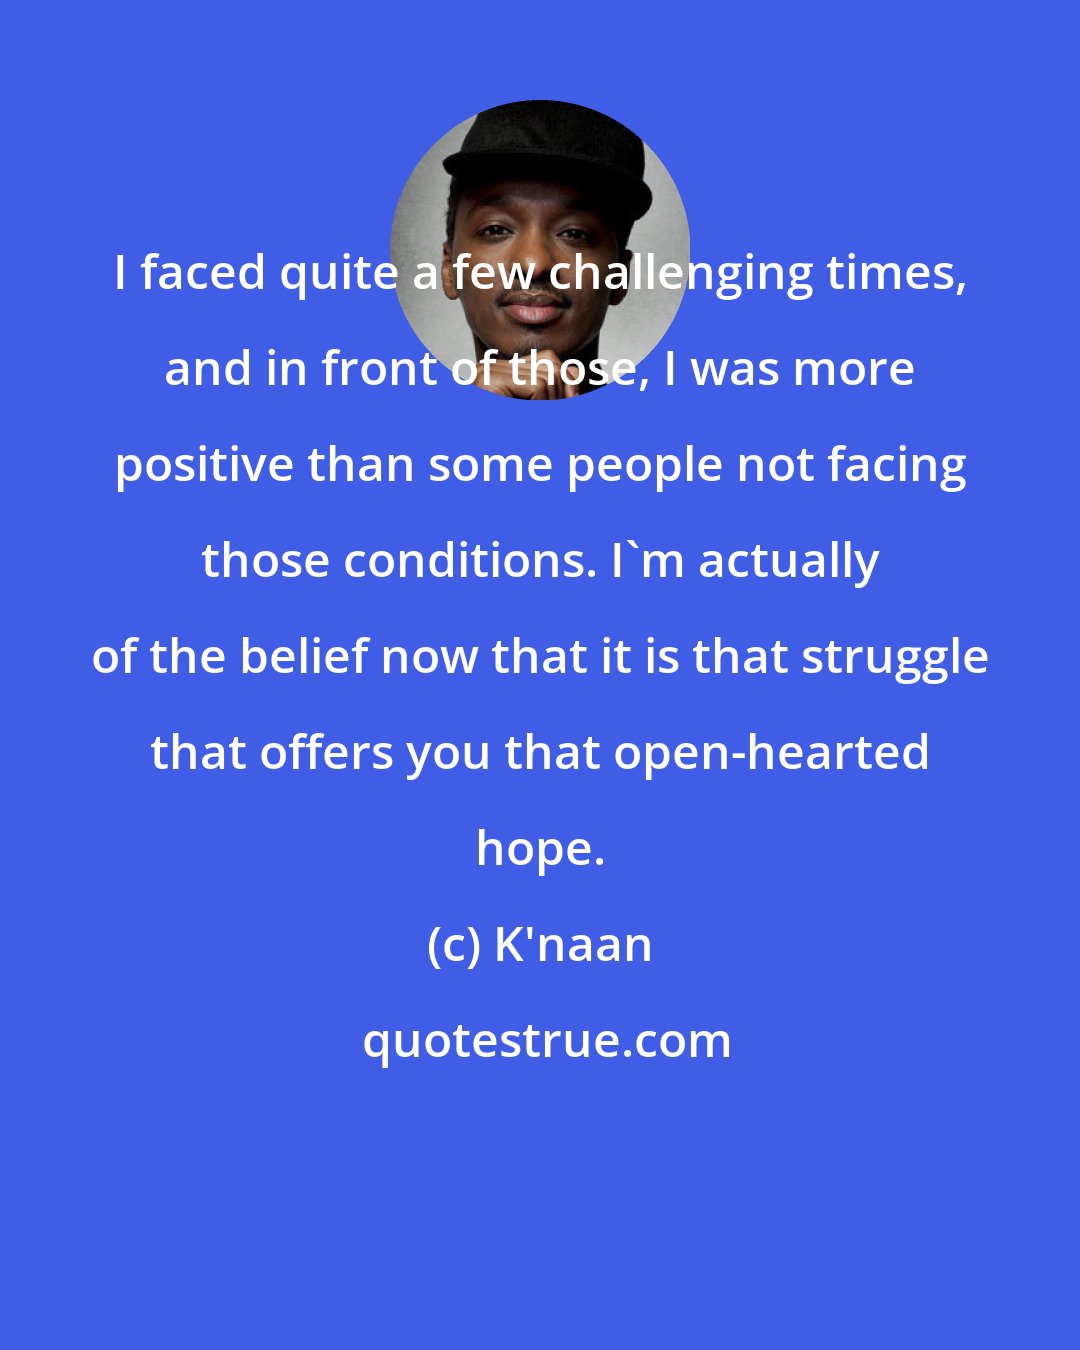 K'naan: I faced quite a few challenging times, and in front of those, I was more positive than some people not facing those conditions. I'm actually of the belief now that it is that struggle that offers you that open-hearted hope.